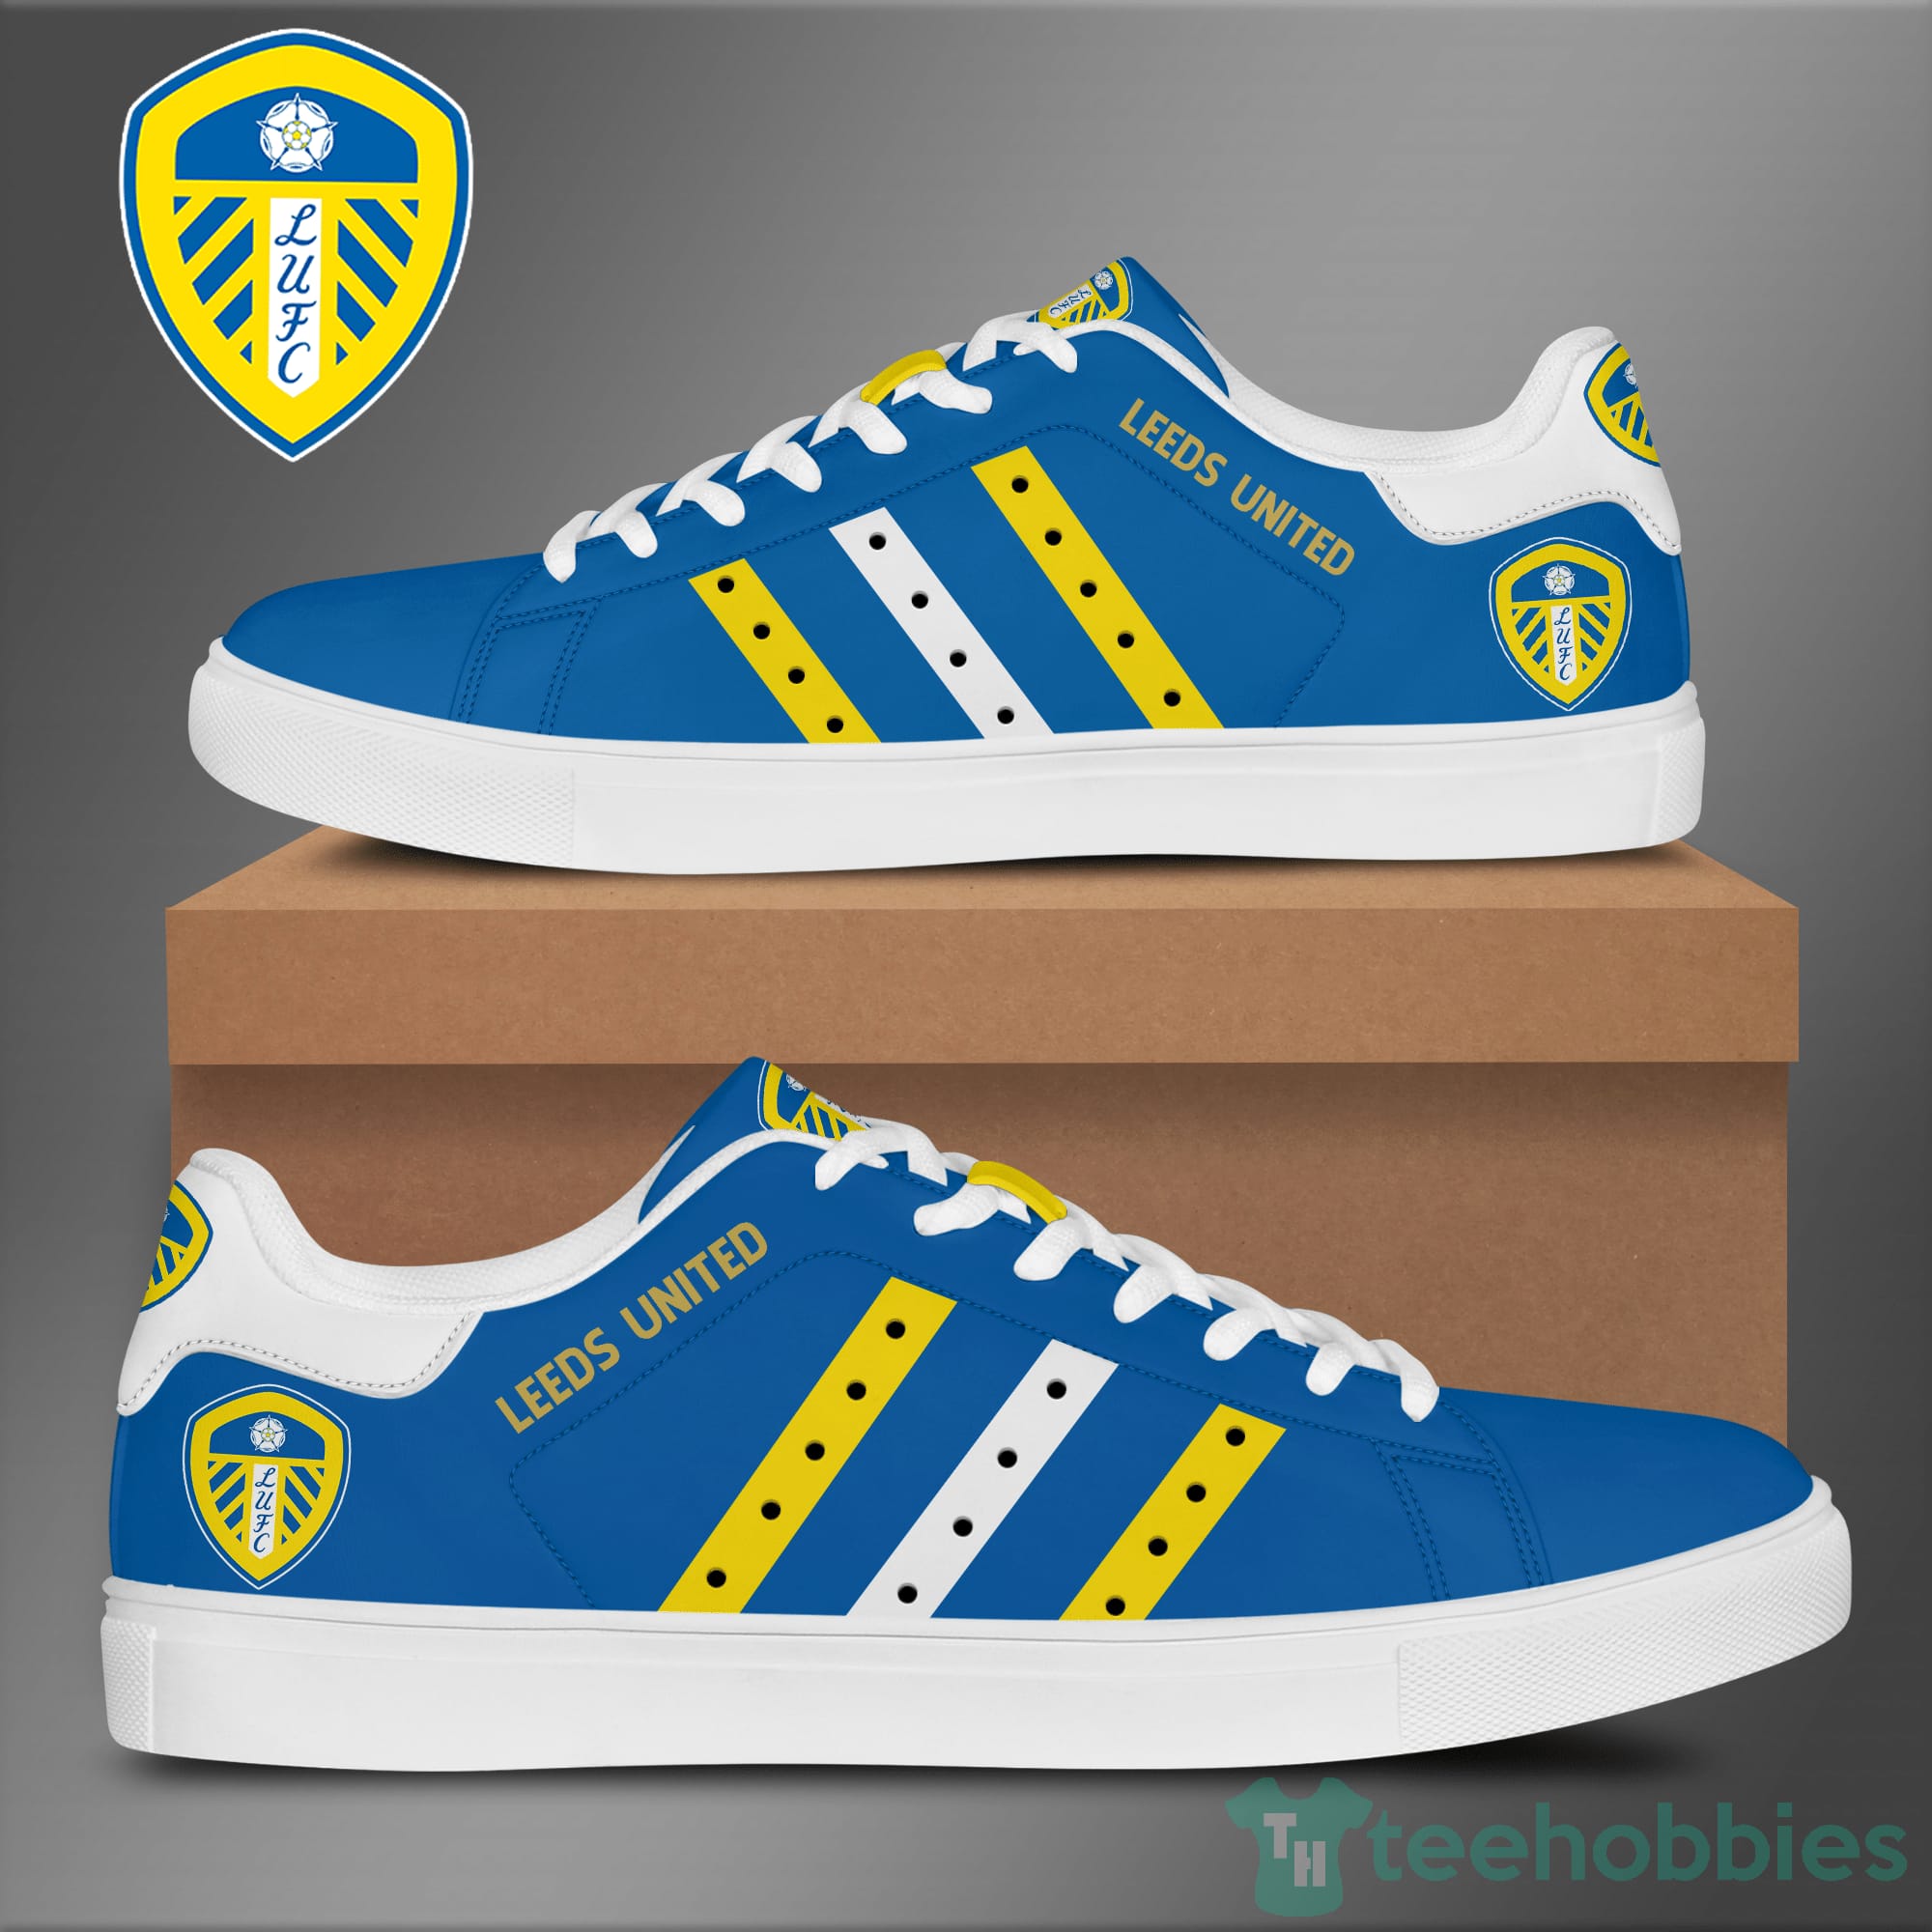 Leeds United Blue Low Top Skate Shoes Product photo 1